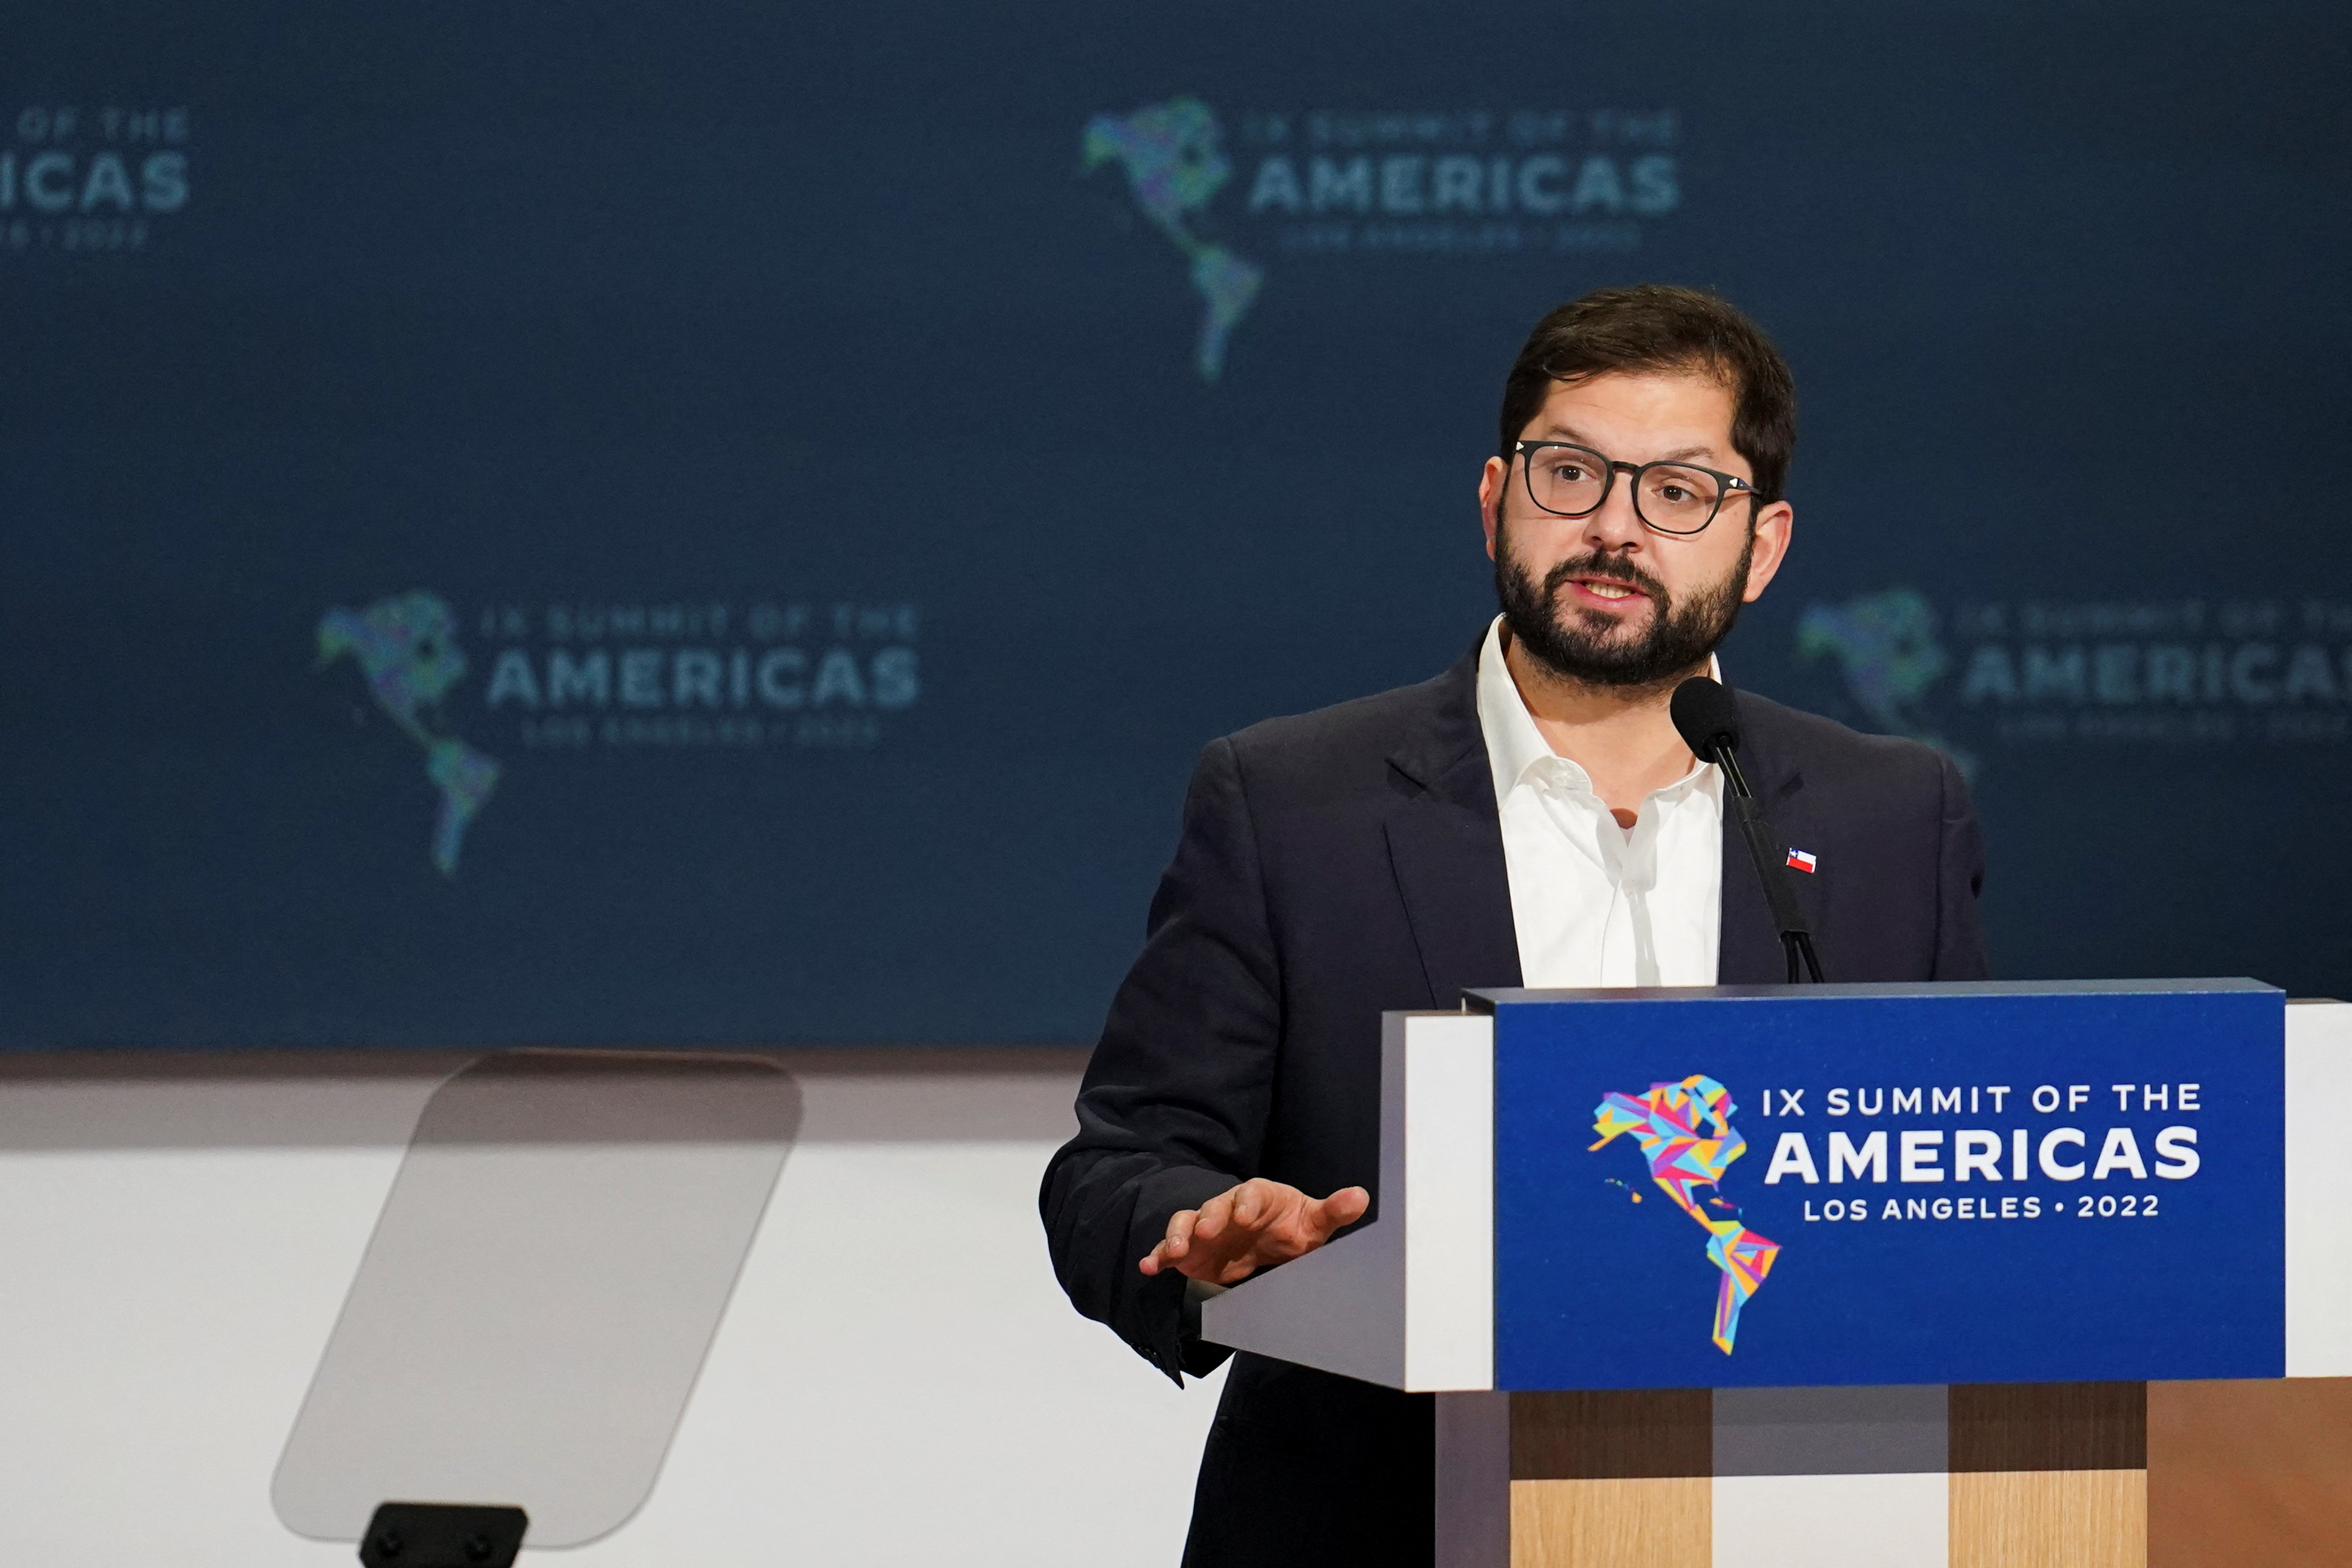 Ninth Summit of the Americas in Los Angeles